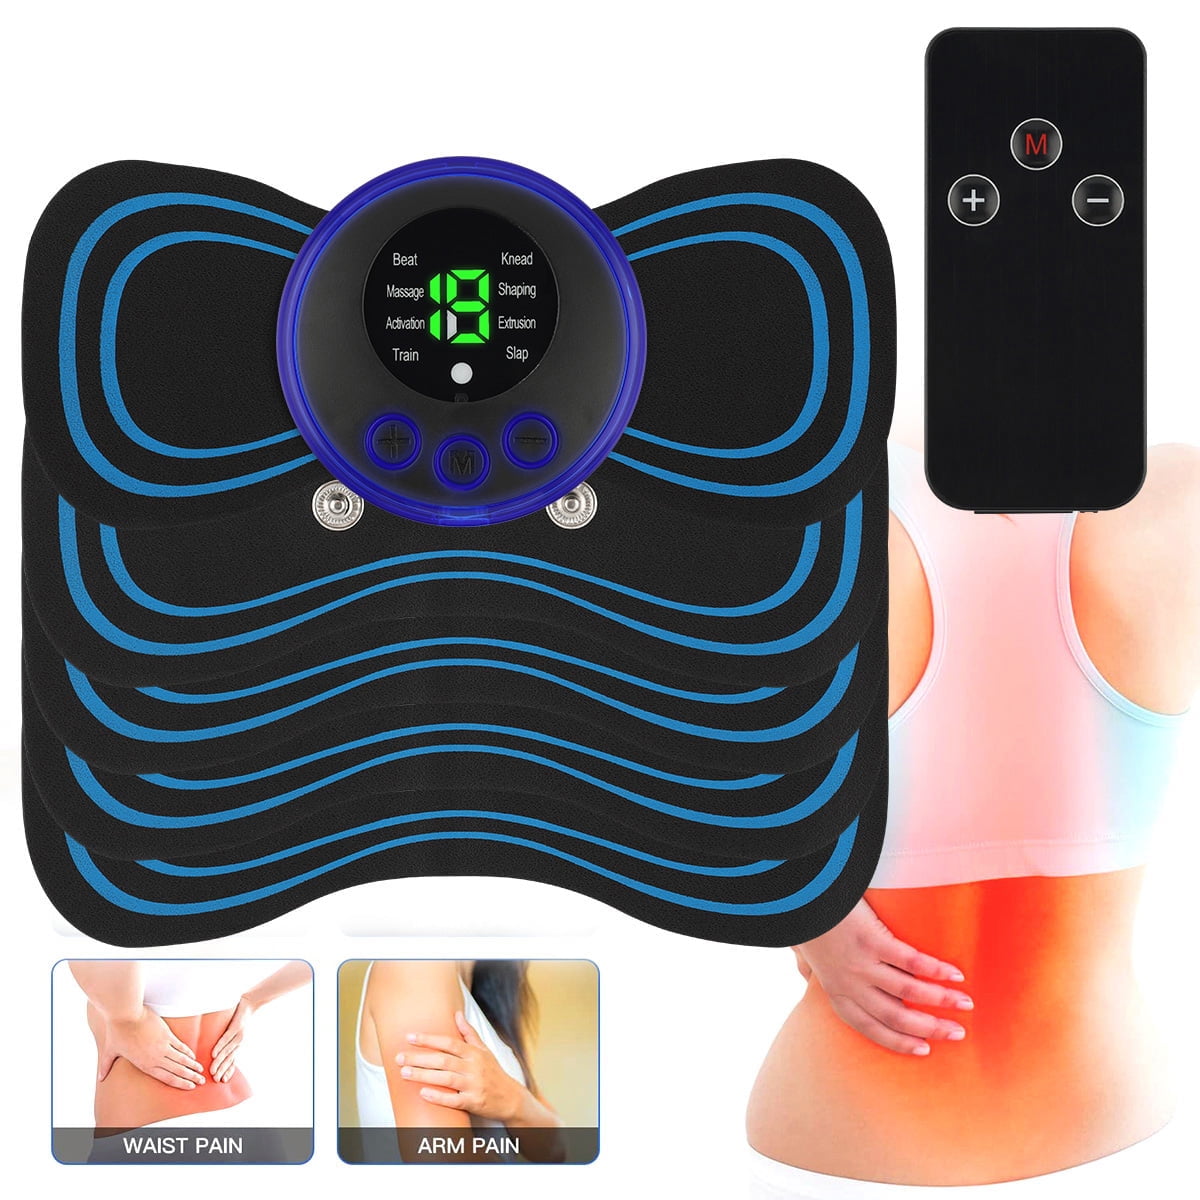 EMS Mini Neck Massager, Lymphatic Drainage Massager, Portable Mini Back  Massage Device for Neck Shoulder Back Waist, Remote Control with 8 Modes 19